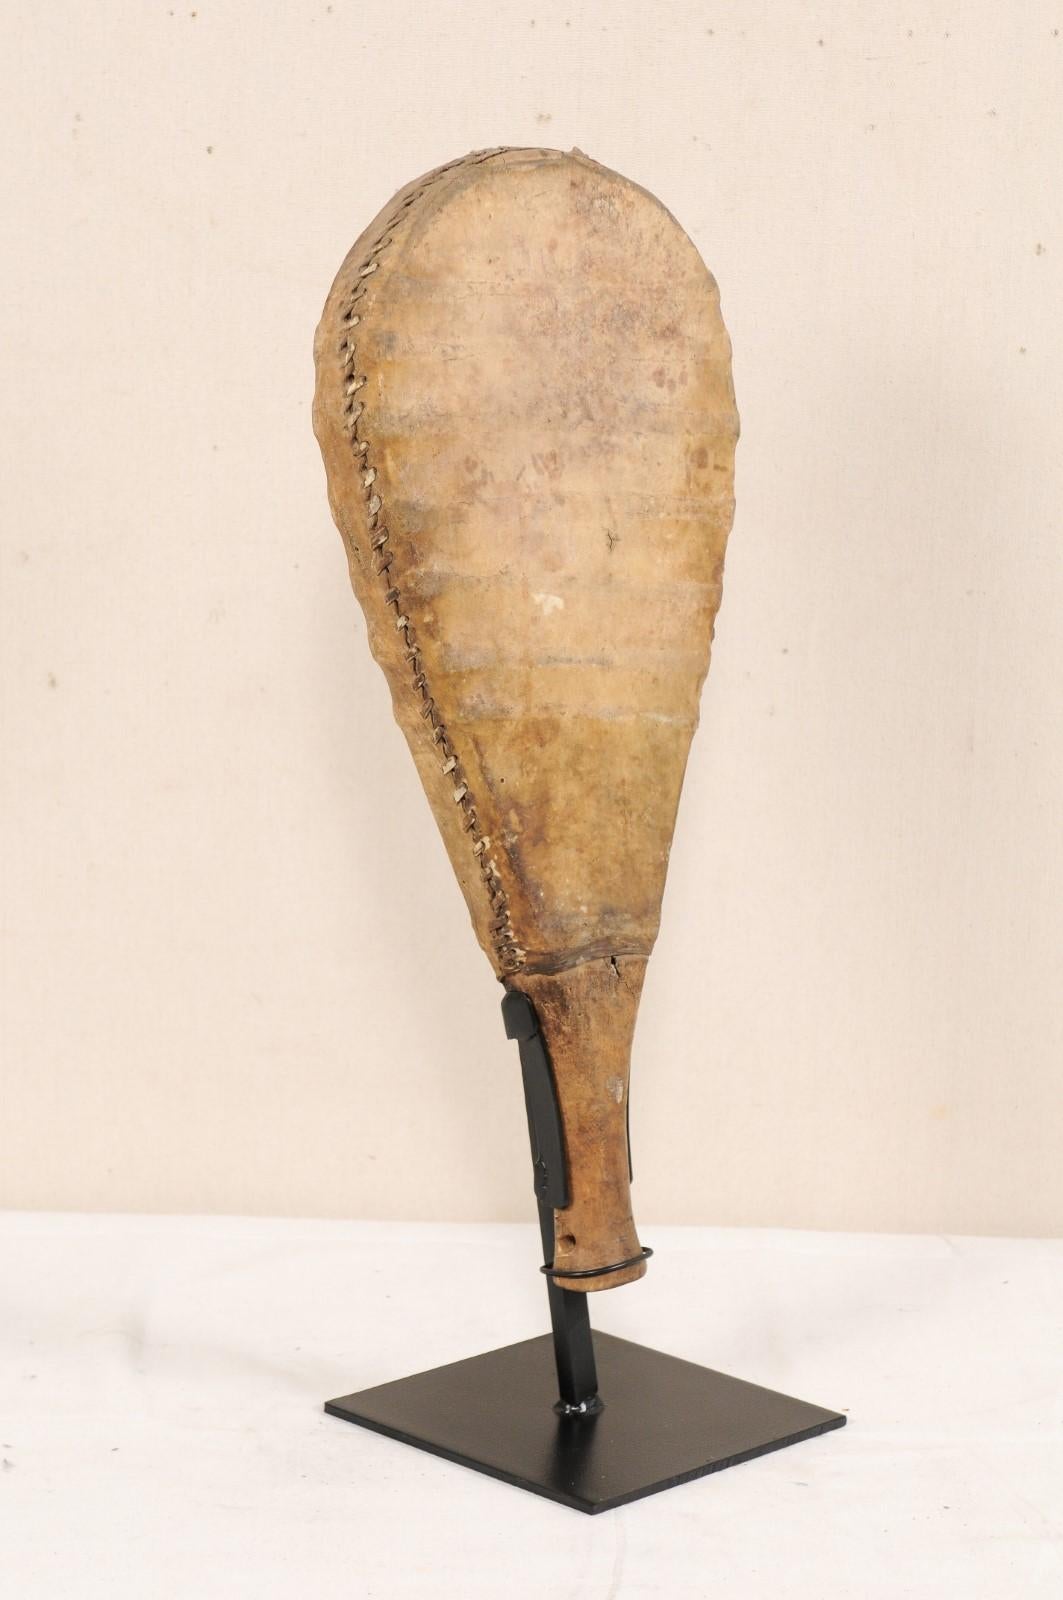 A leather and wooden gaming paddle from the mid-20th century. This vintage game paddle from India features a wooden handle and droplet-shaped body which has been wrapped in stretched leather and handstitched along it's sides. The paddle has been